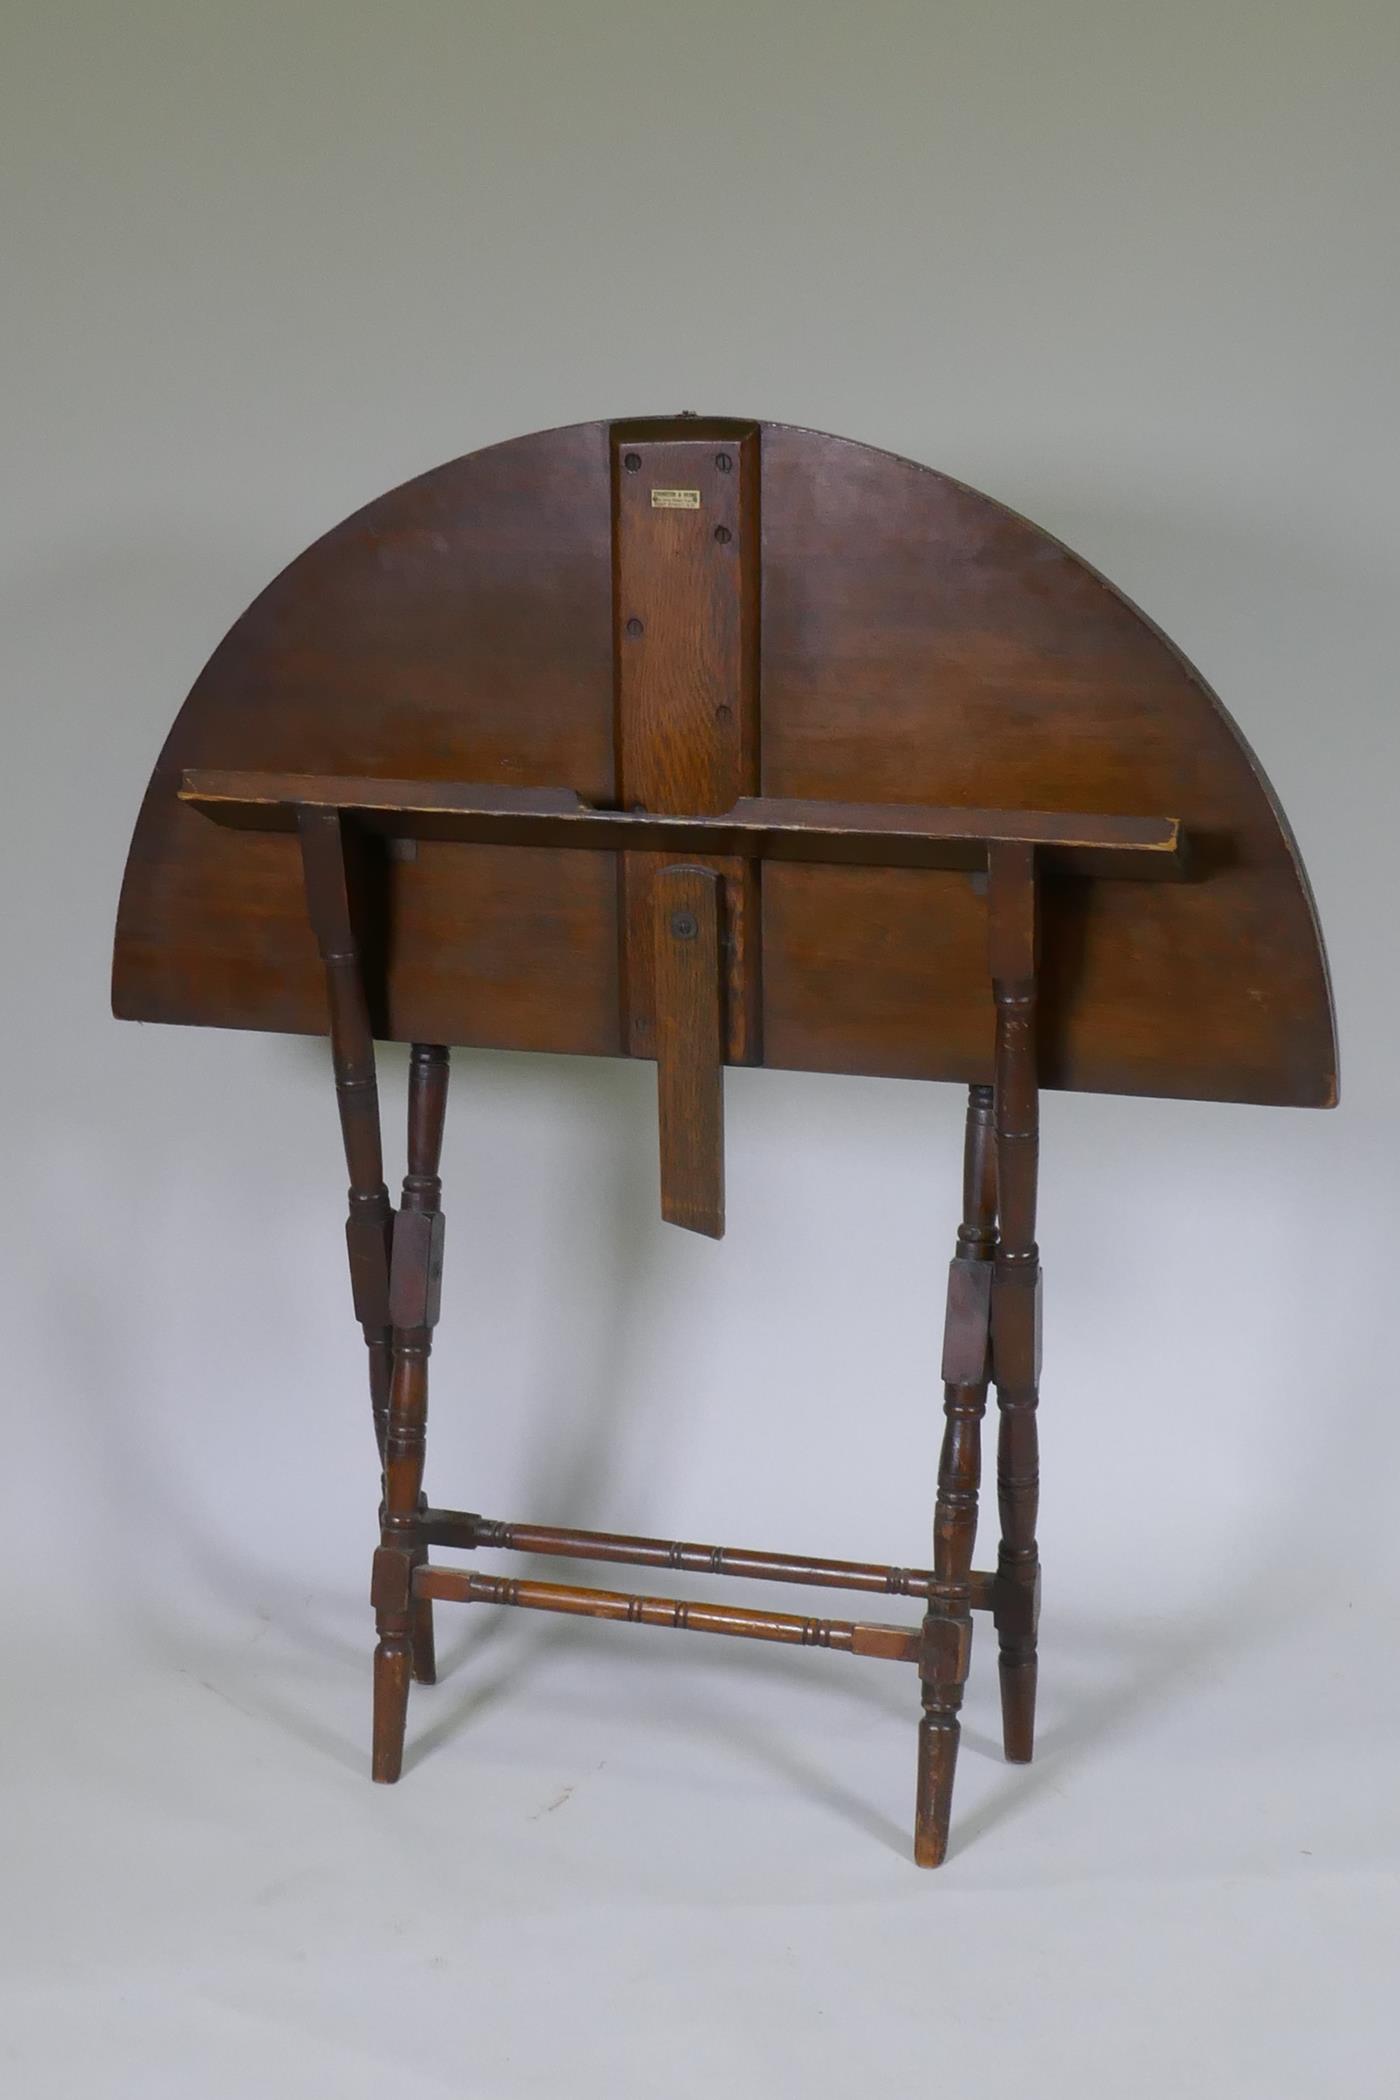 An early C20th beechwood coaching table, bears label Thornton & Herne, 13 Little Cadogan Place, Pont - Image 3 of 4